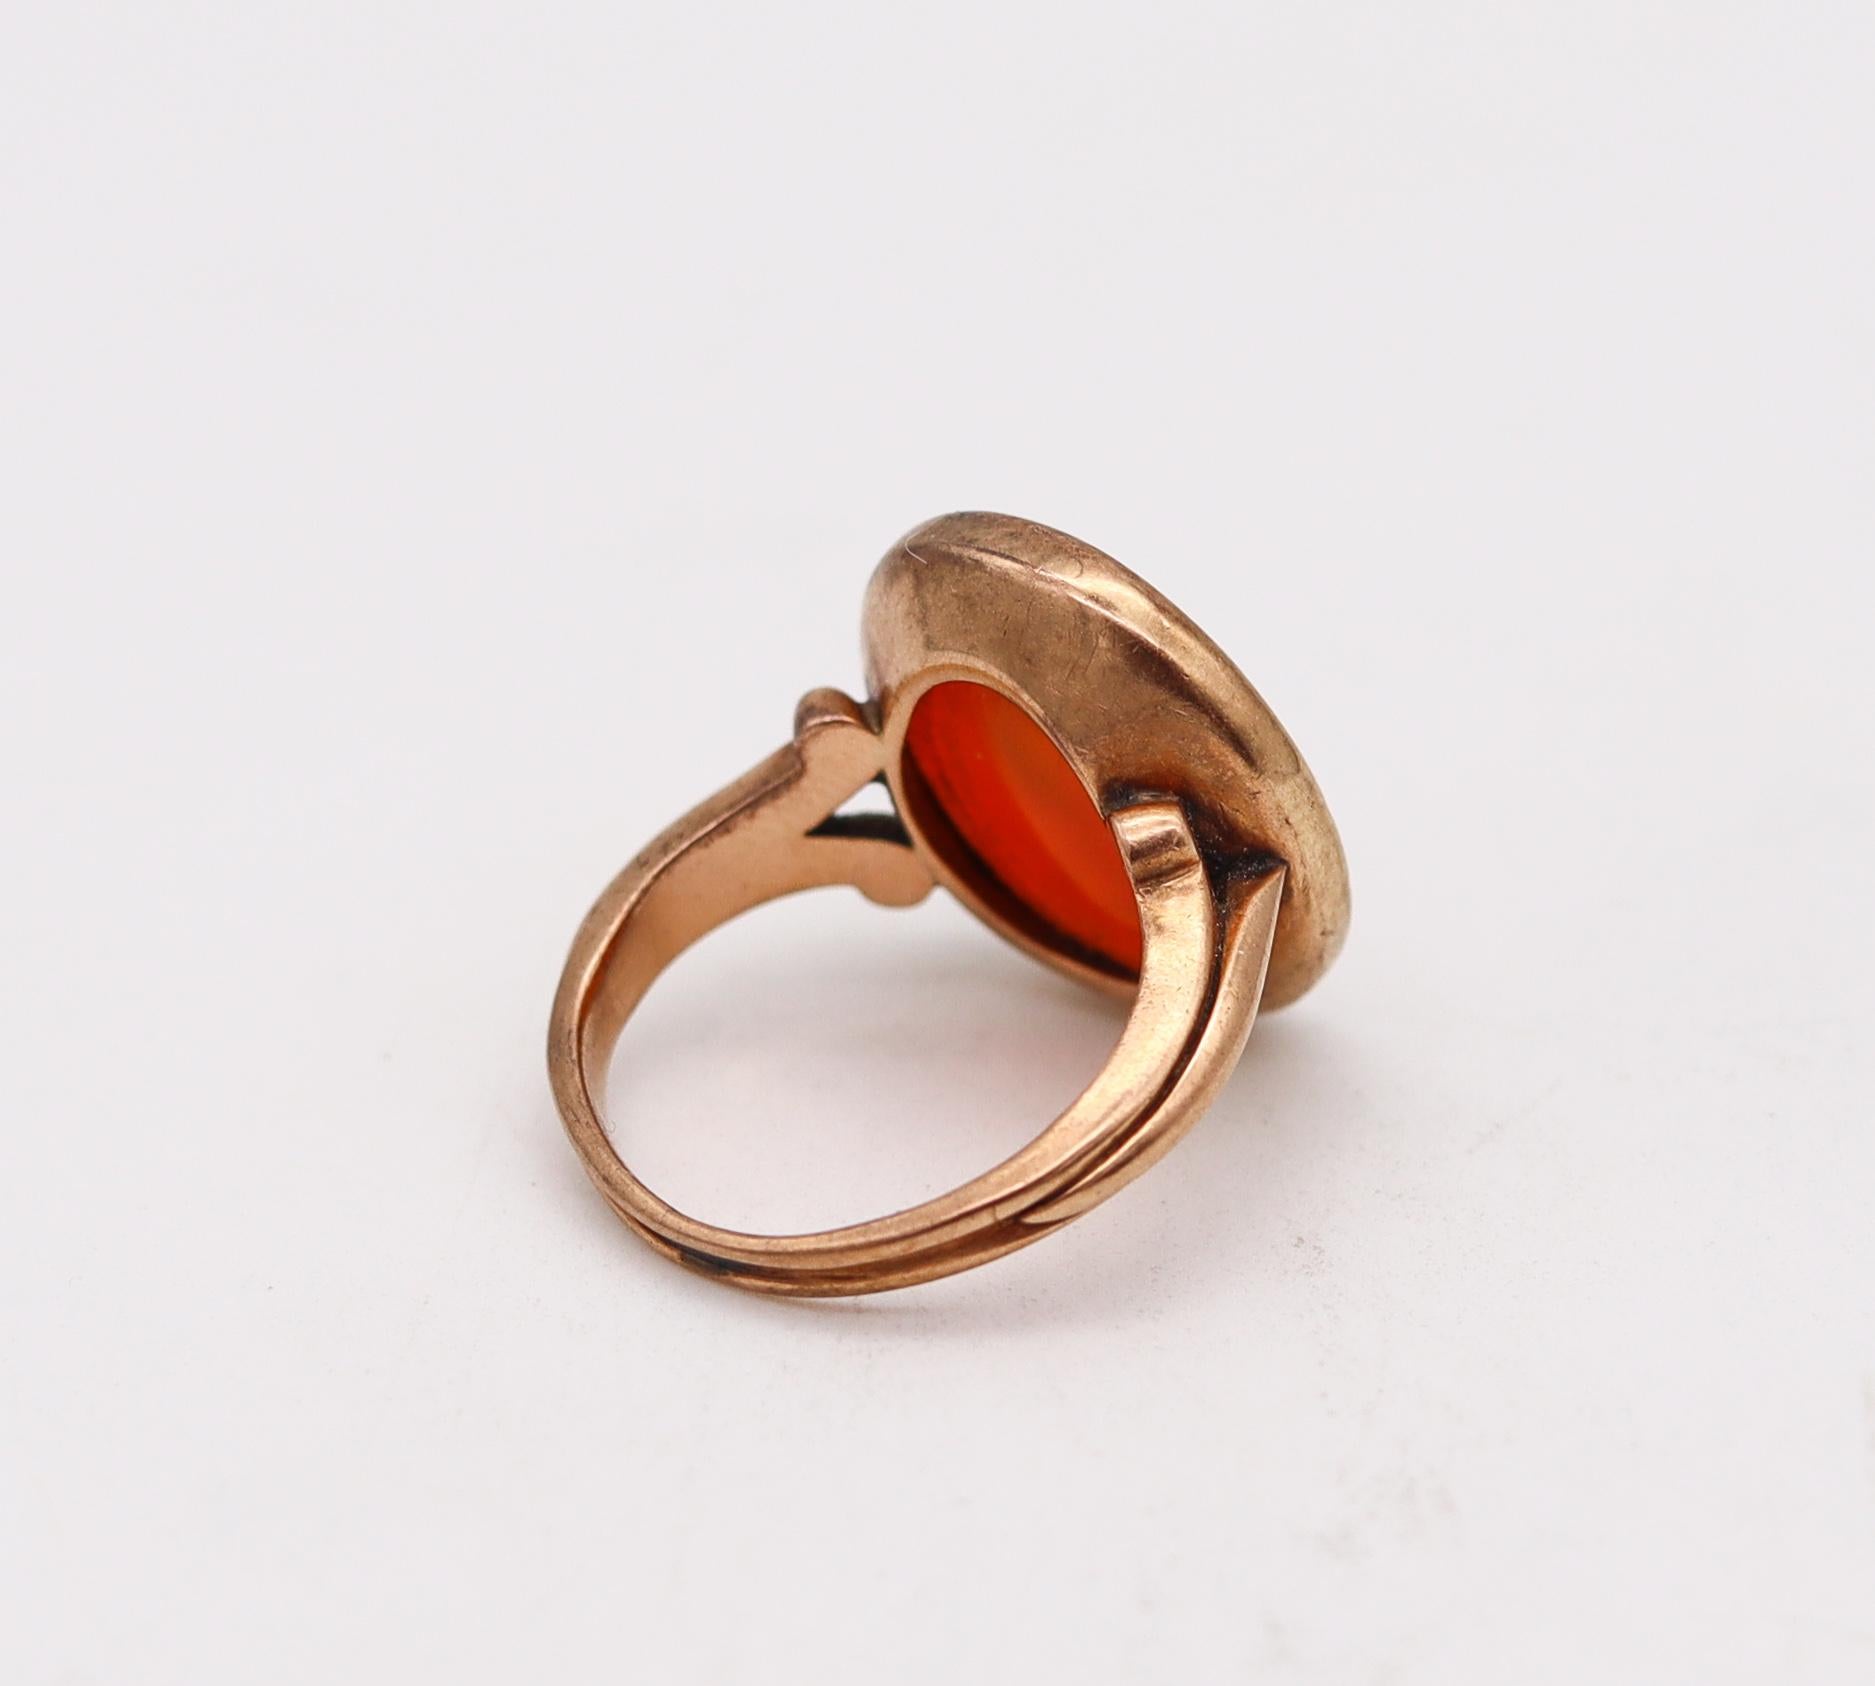 Women's or Men's Victorian 1890 Signet Intaglio Ring in 18kt Yellow Gold with Carved Carnelian